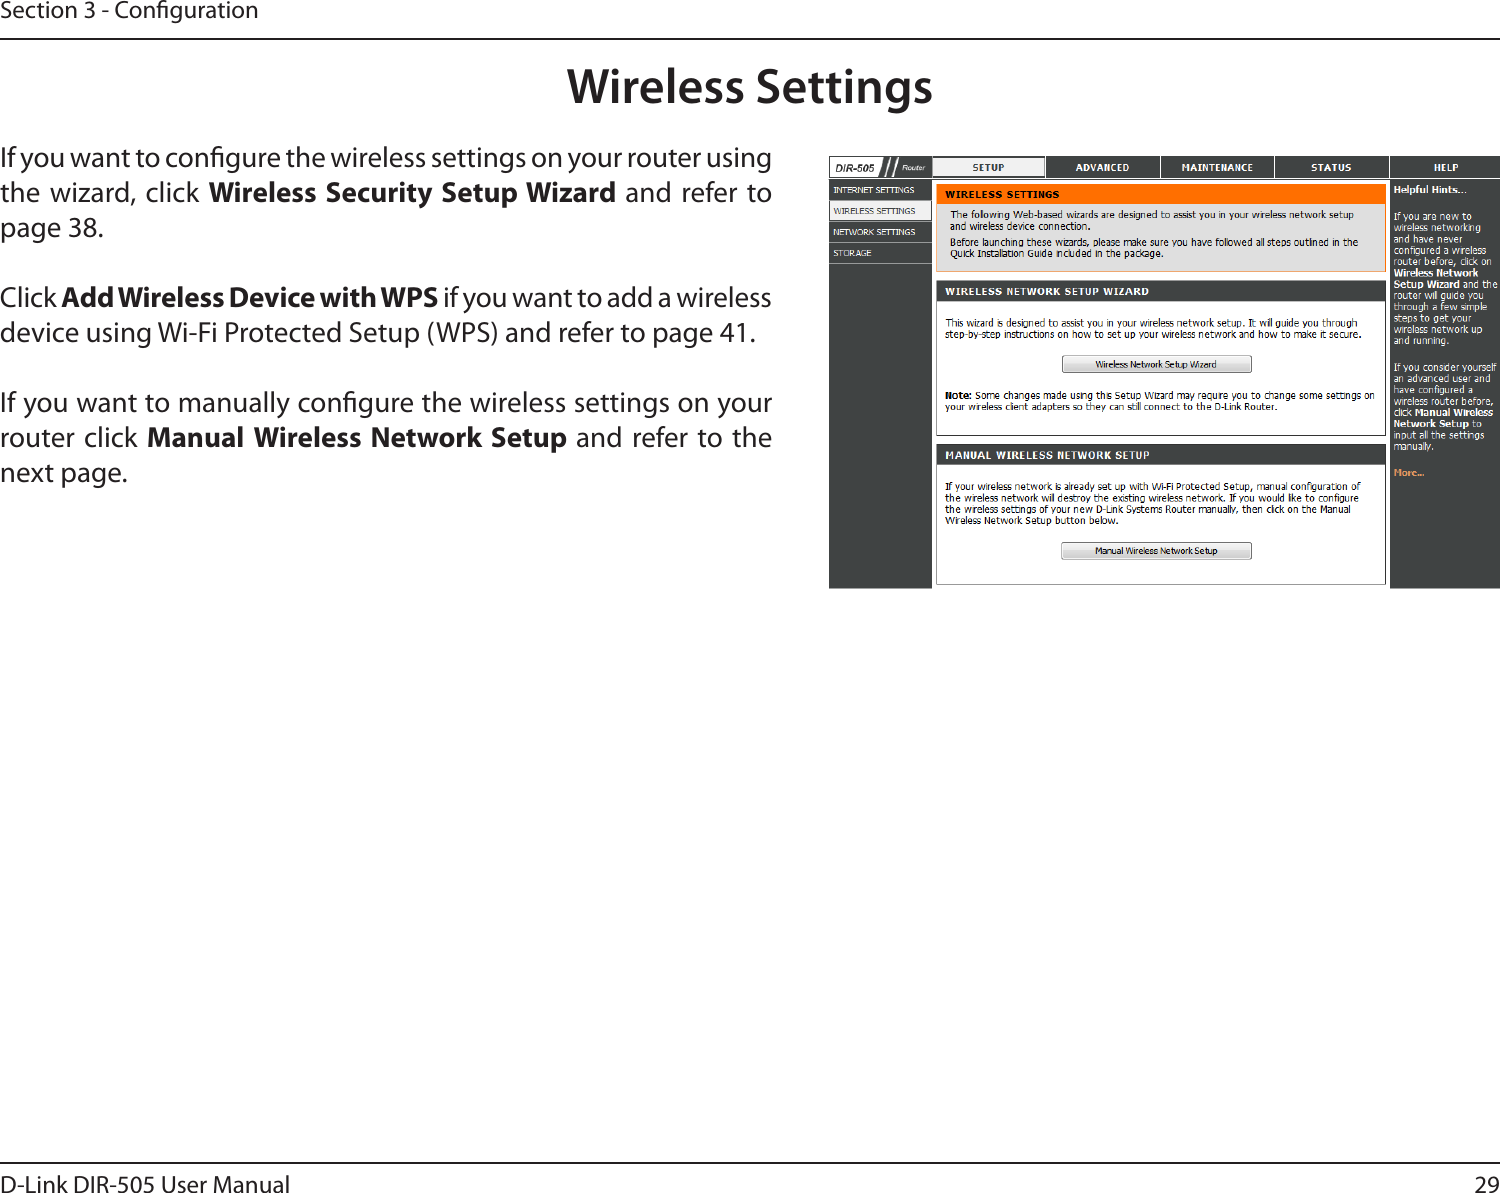 29D-Link DIR-505 User ManualSection 3 - CongurationWireless SettingsIf you want to congure the wireless settings on your router using the wizard, click Wireless Security Setup Wizard and refer to page 38.Click Add Wireless Device with WPS if you want to add a wireless device using Wi-Fi Protected Setup (WPS) and refer to page 41.If you want to manually congure the wireless settings on your router click Manual Wireless Network Setup and refer to the next page.